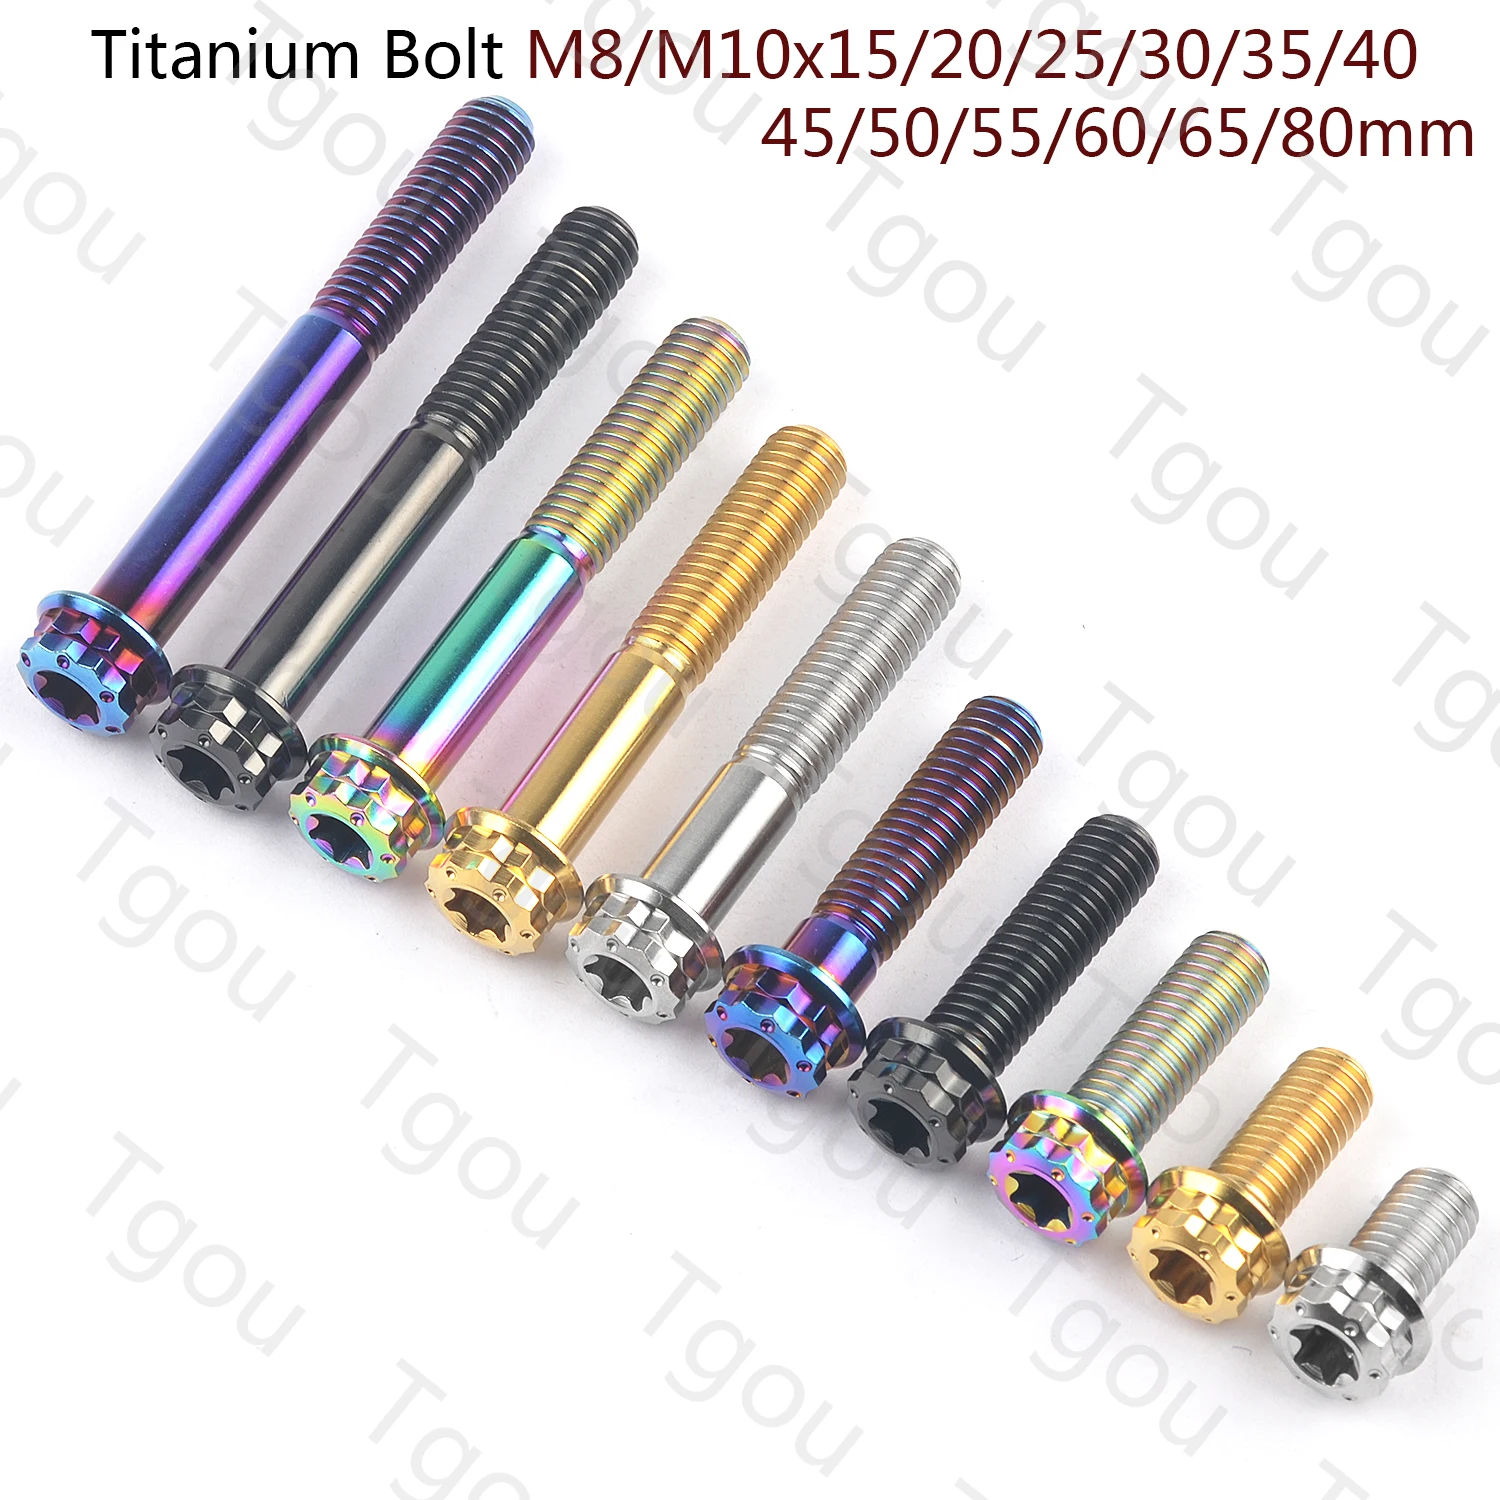 

Tgou Titanium Bolt M8x15~80mm M10x25~70mm Pitch1.25/1.5mm 12 Points Flange Torx Head Screw for Motorcycle Calipers Refitted